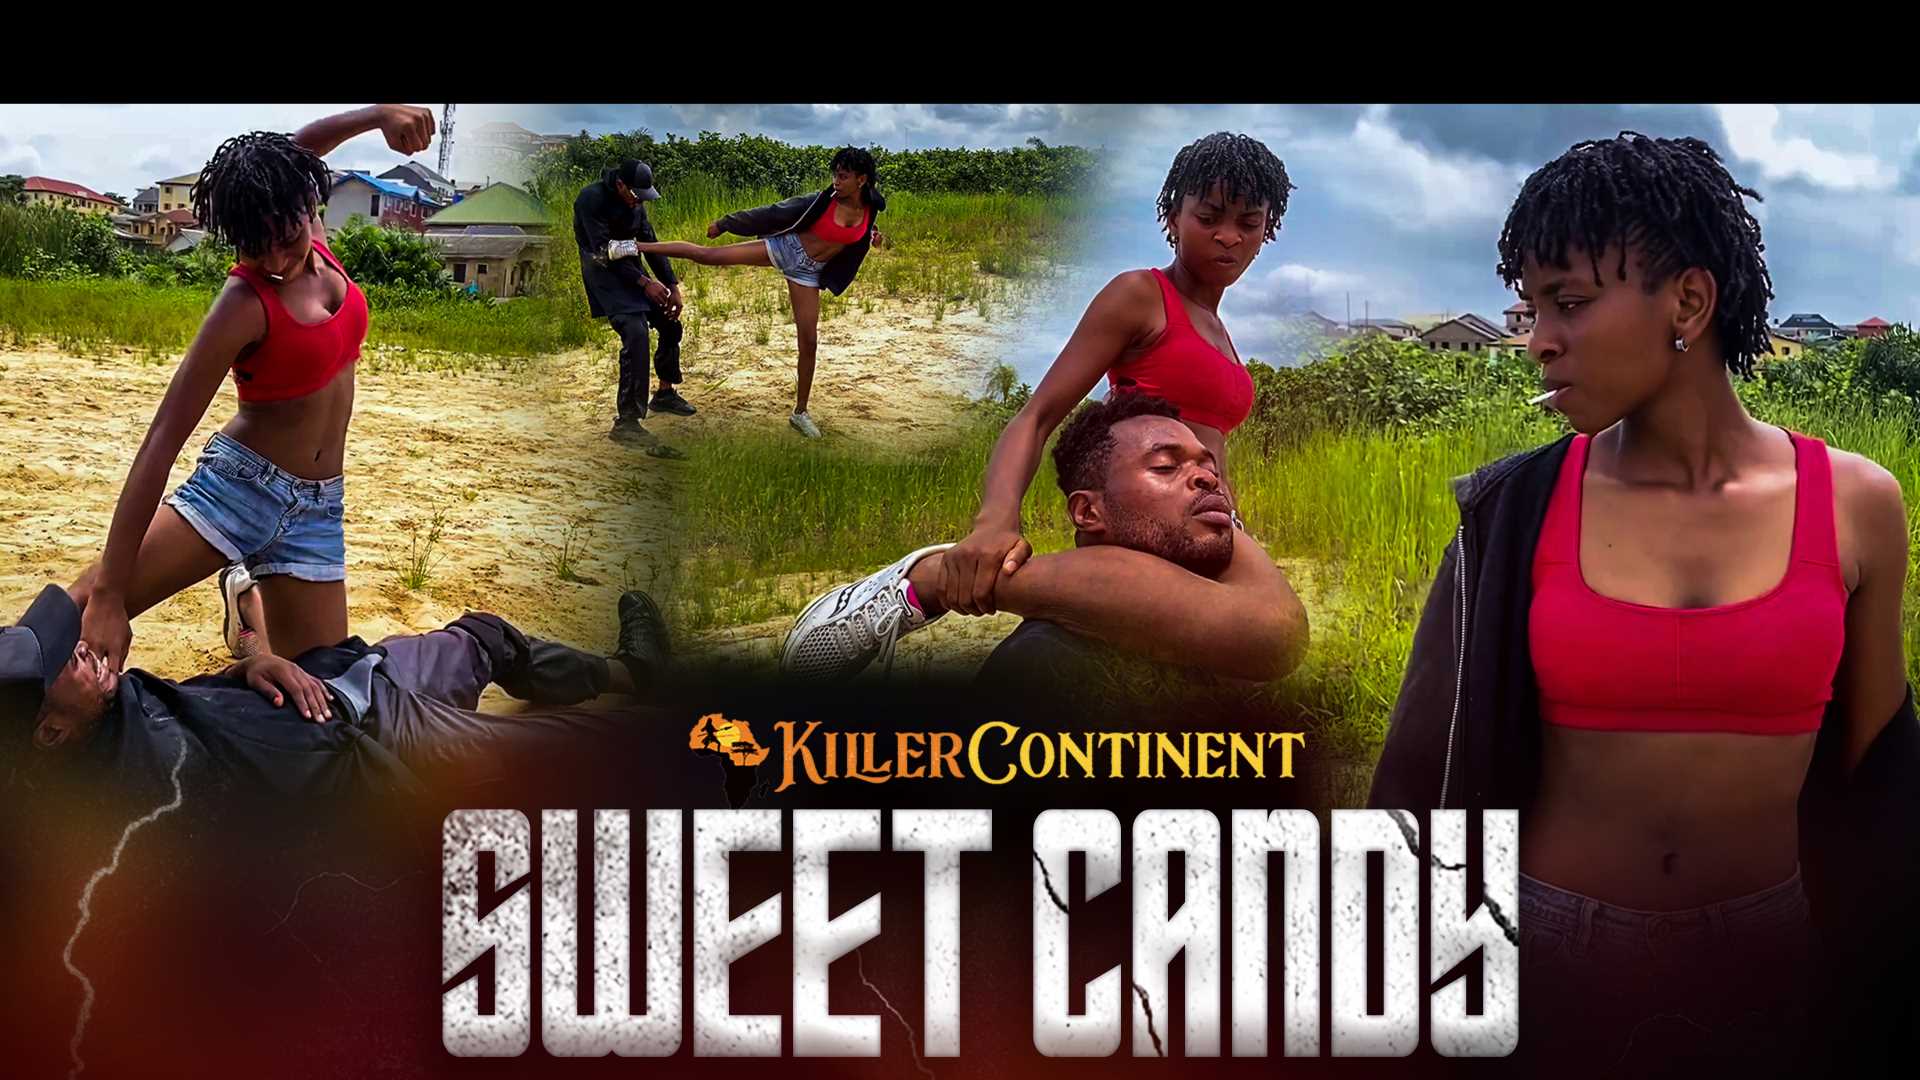 #8 - Sweet Candy